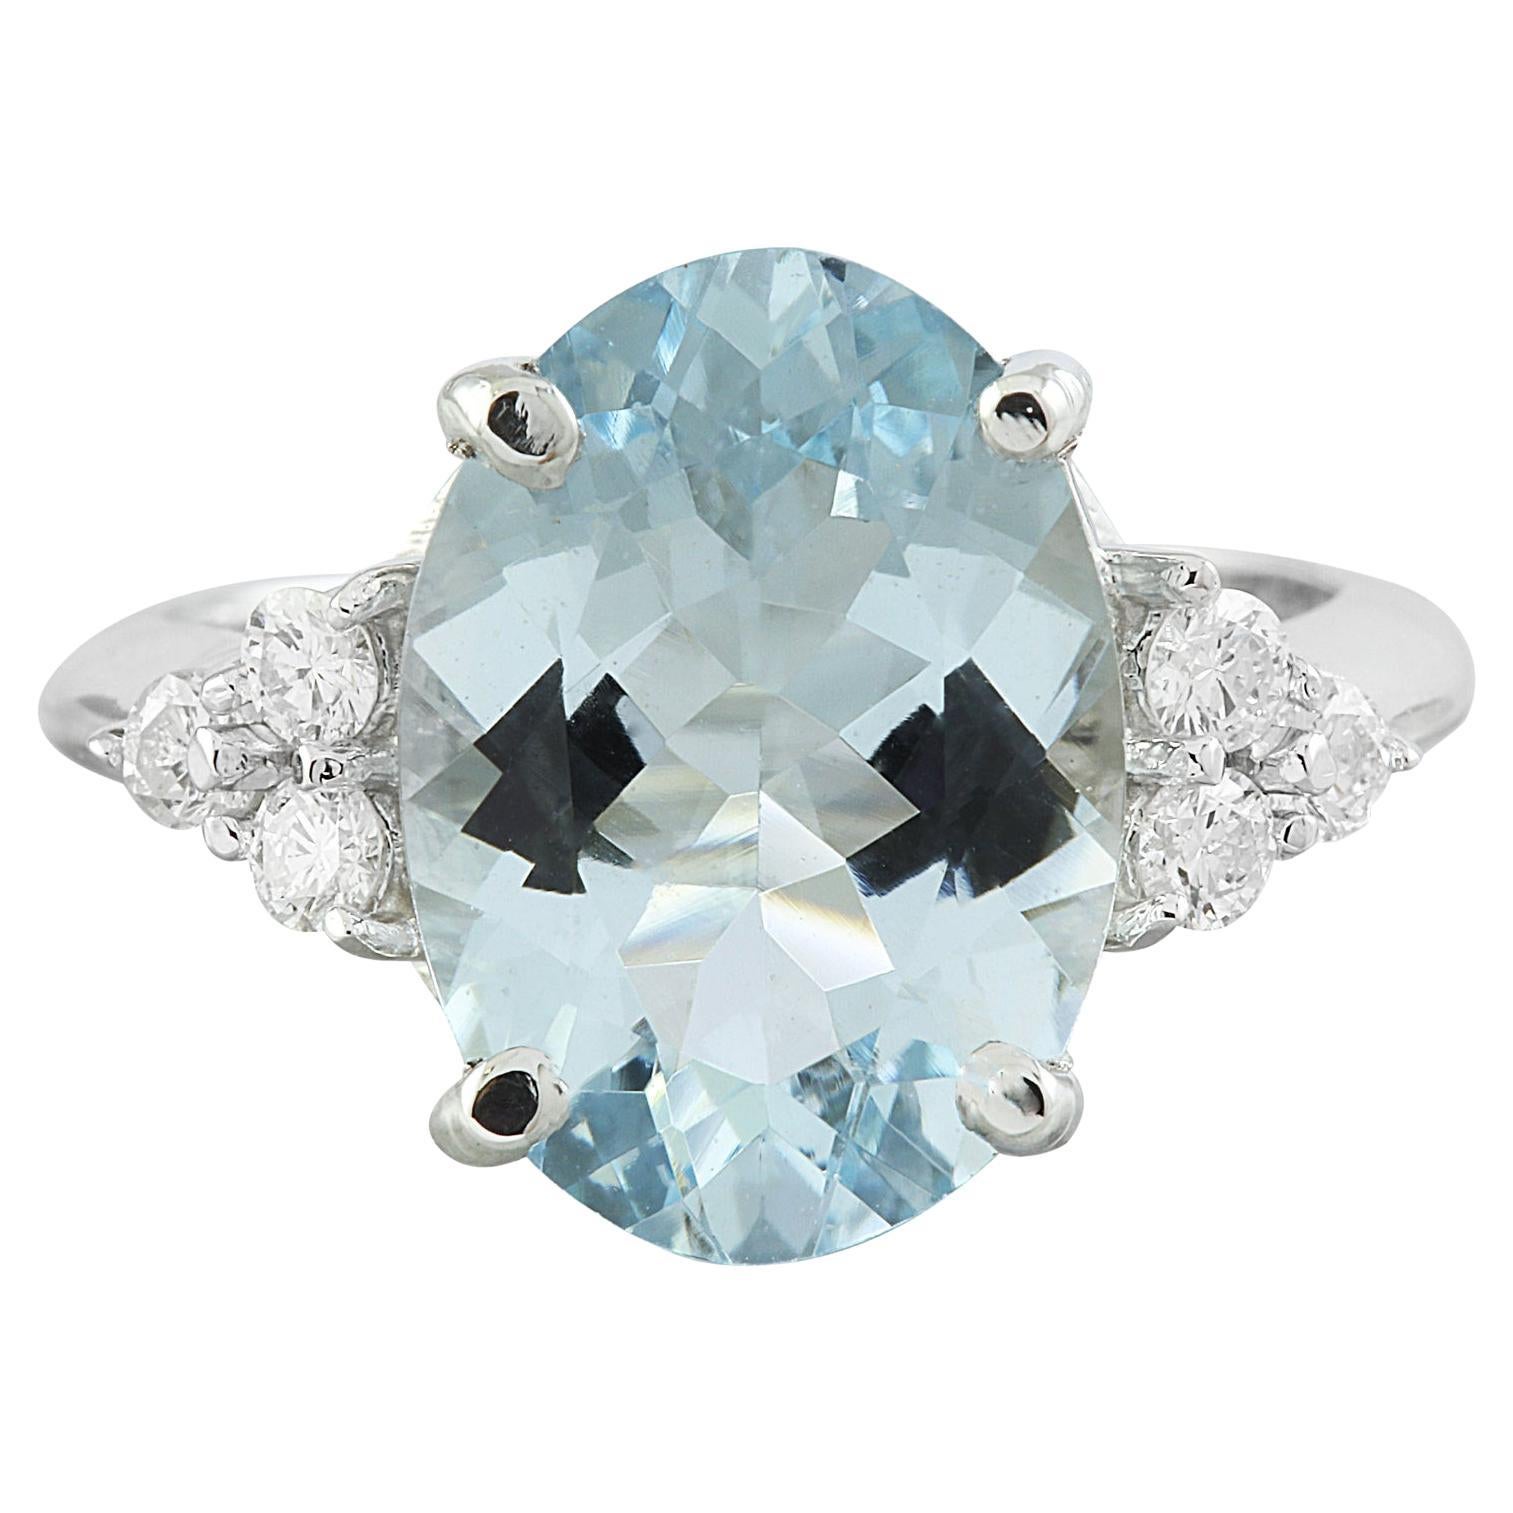 Dazzling Aquamarine Diamond Ring: Exquisite Beauty in 14K Solid White Gold For Sale